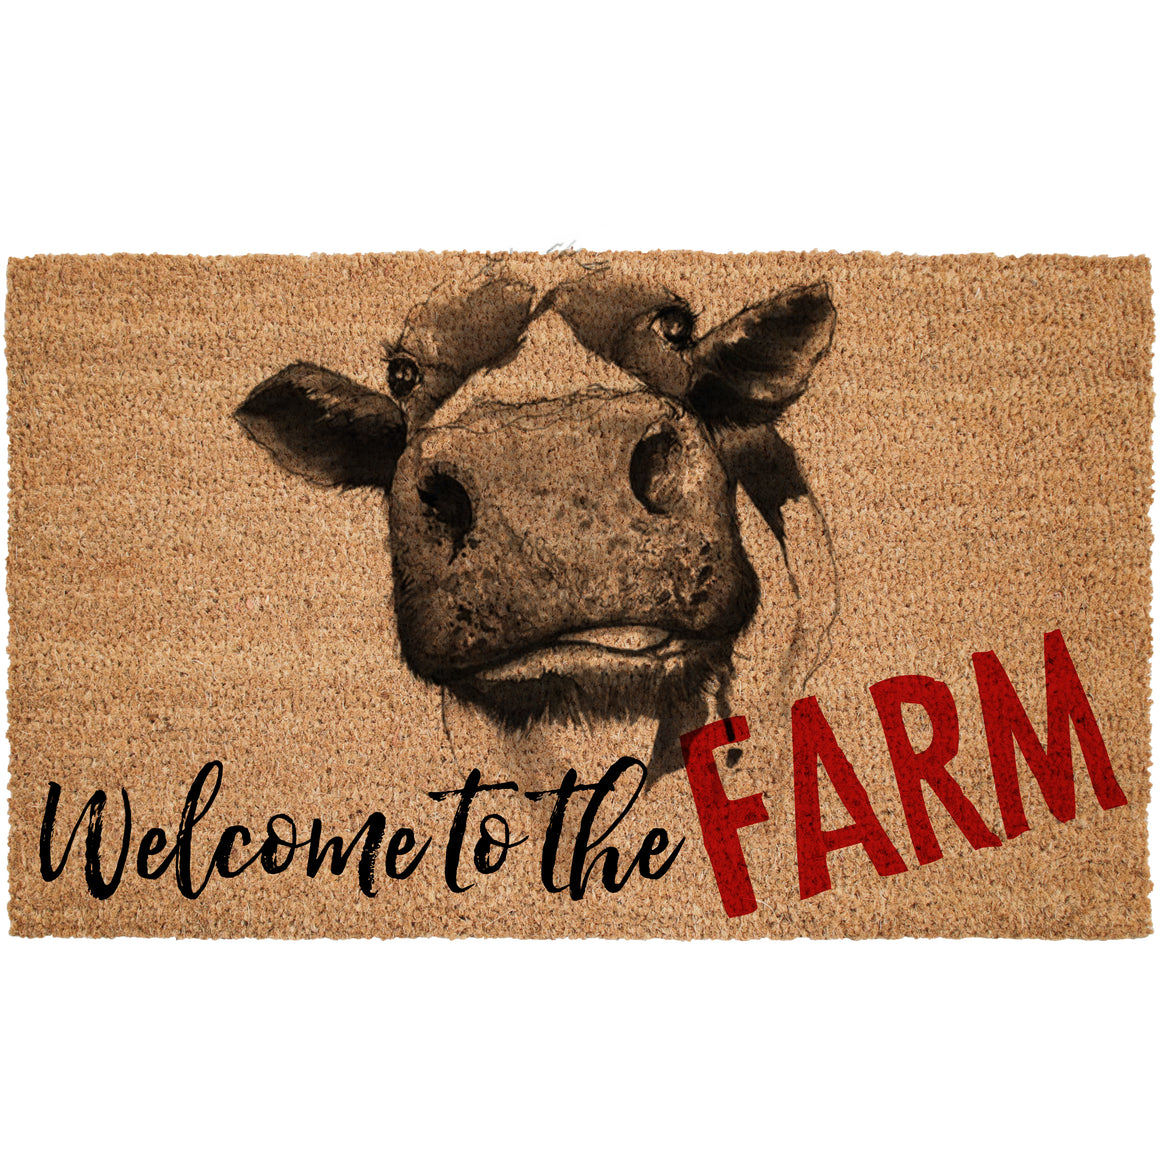 Welcome To The Farm Coir Doormat